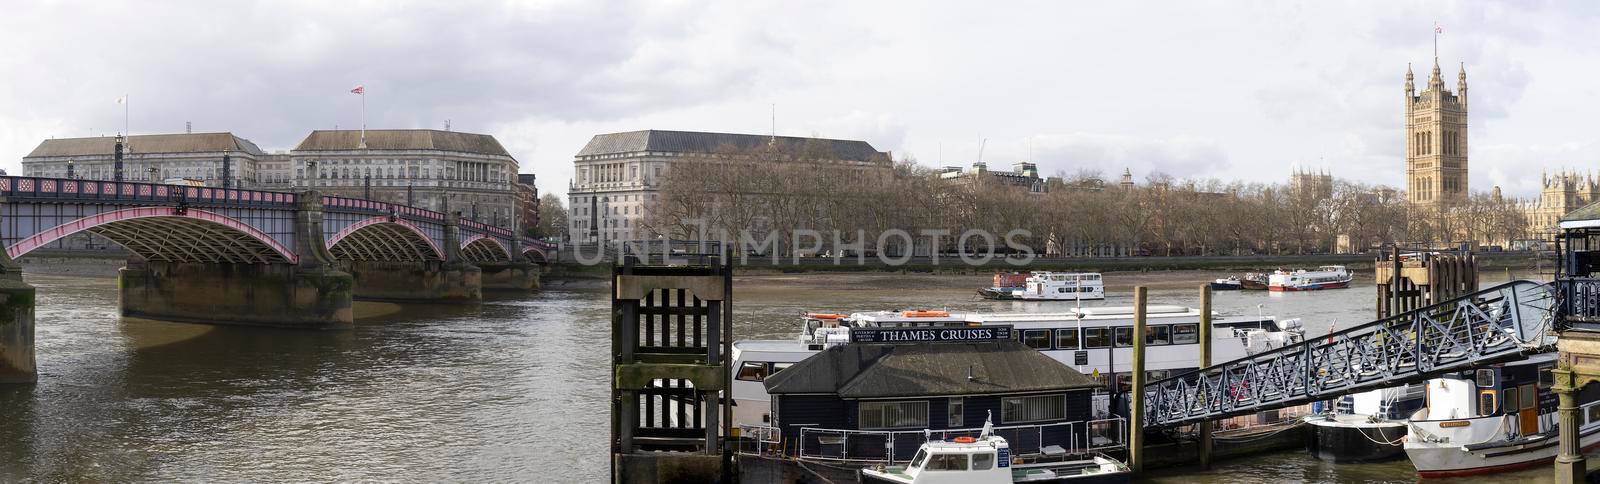 London / England - 03-06-2017 : View over the Thames from Lambeth Place showing Lambeth Bridge, MI5 Security Service Department for Environment and Houses of Parliament